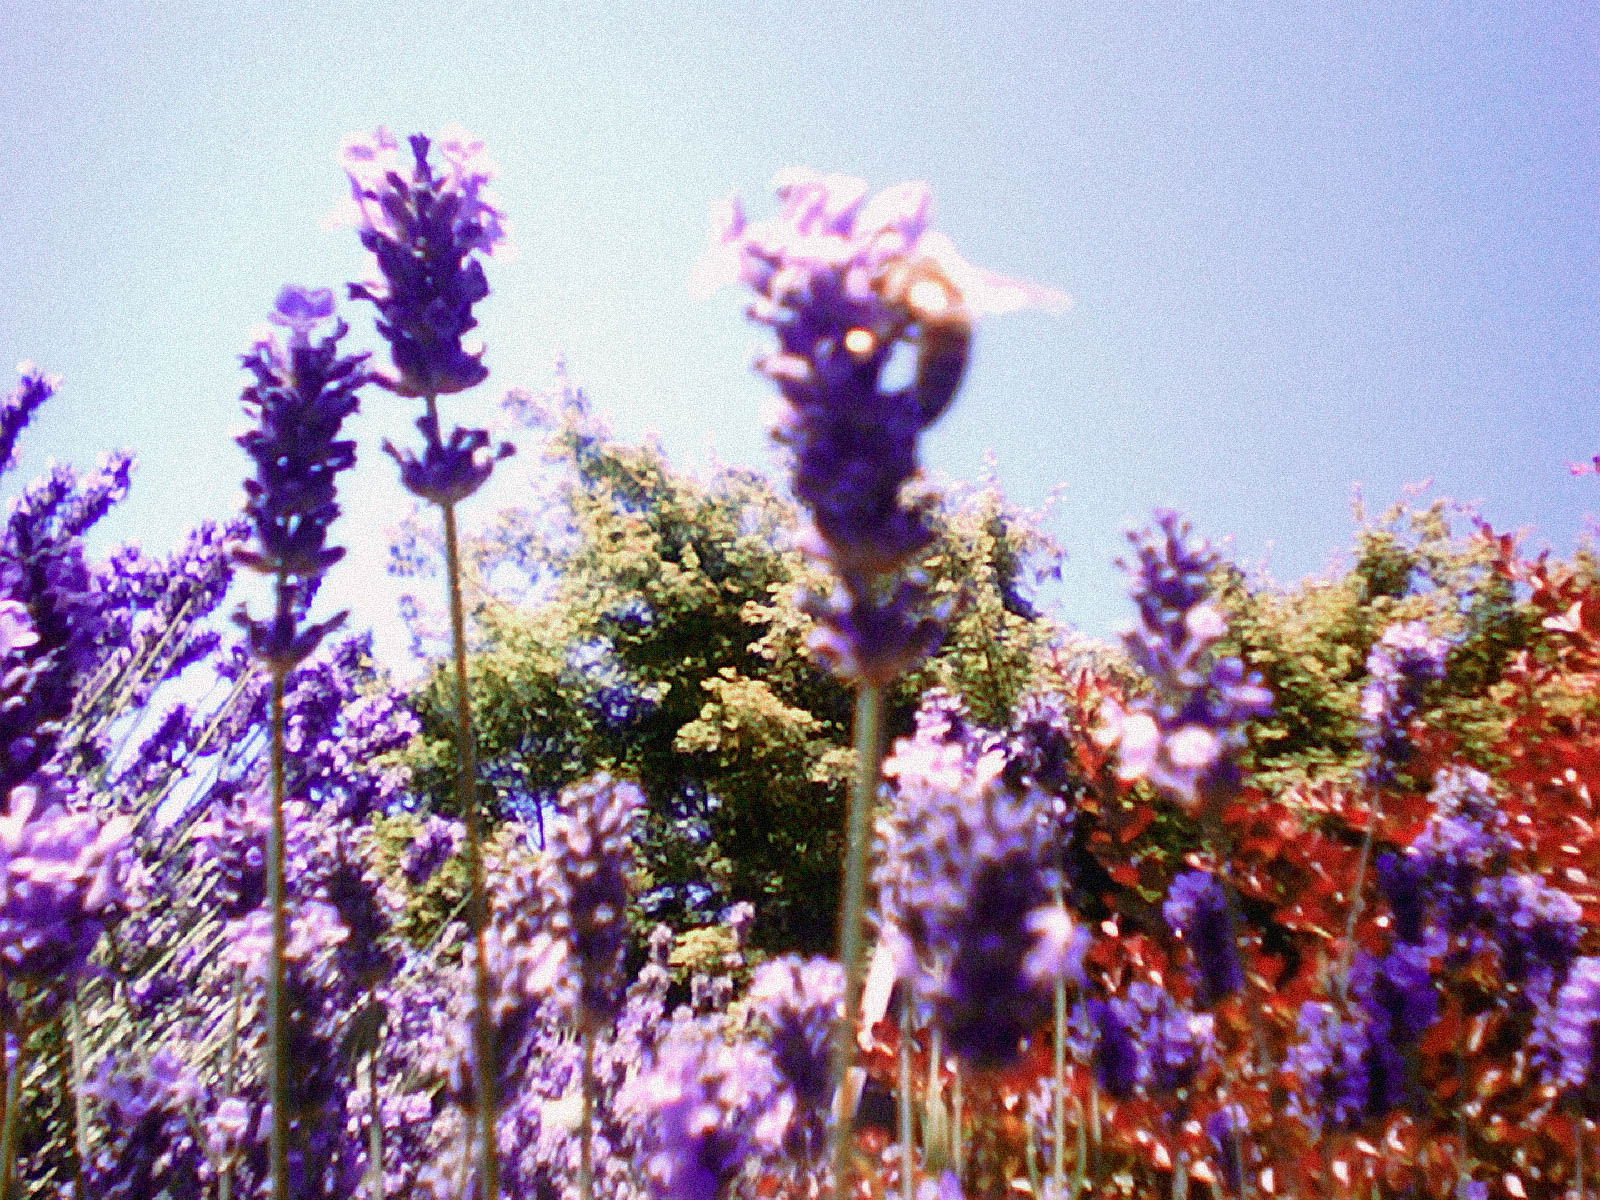 A close-up of purple lavender flowers with a bee, set against a clear blue sky and green foliage in the background.